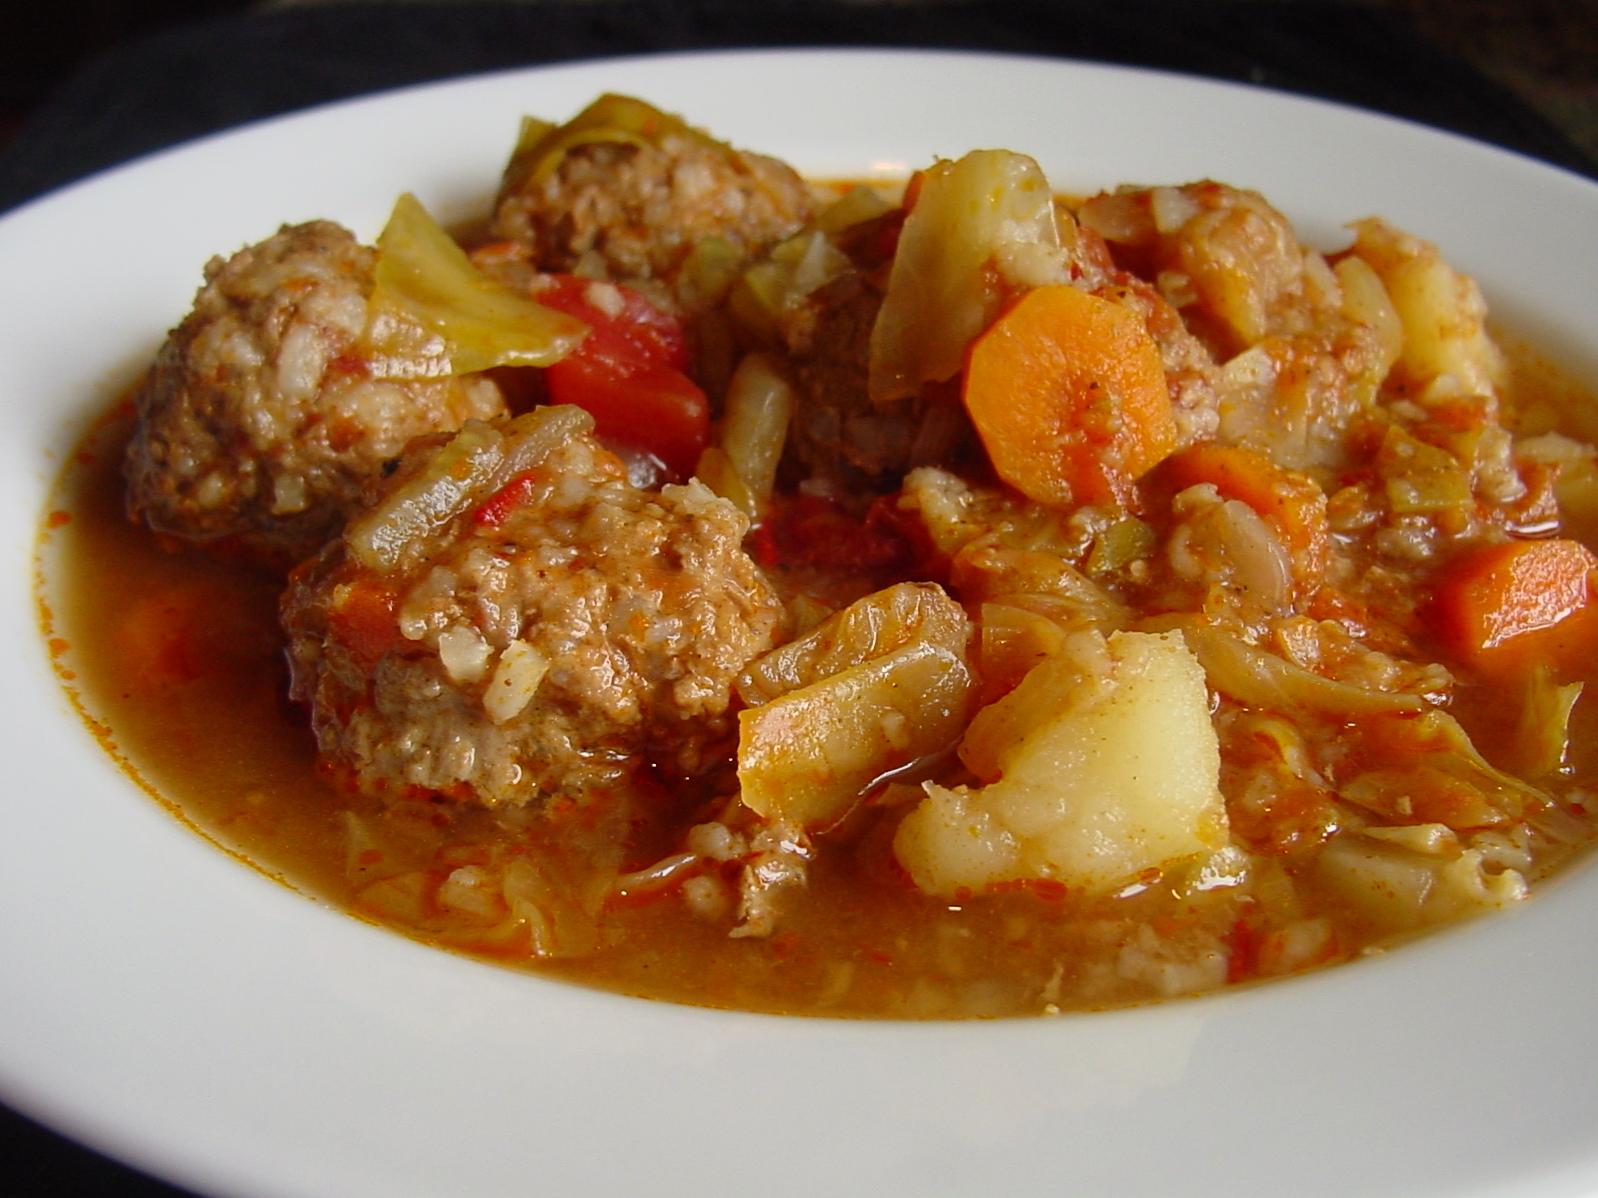 Delicious Meatball Soup Recipe to Warm Your Soul